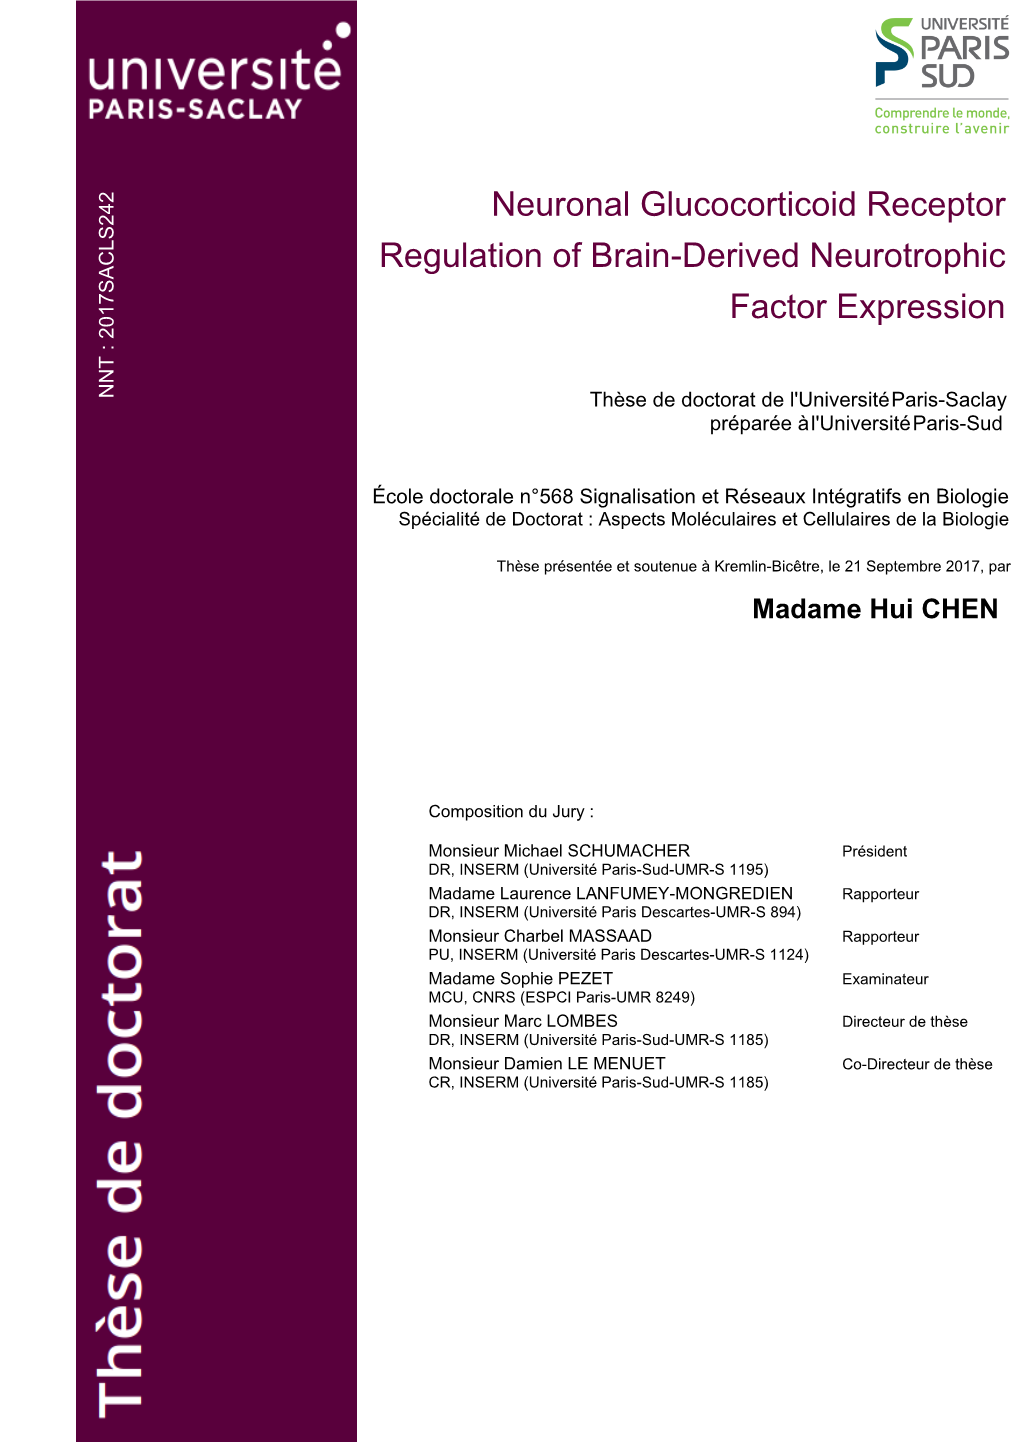 Neuronal Glucocorticoid Receptor Regulation of Brain-Derived Neurotrophic Factor Expression S242 : 2017SACL